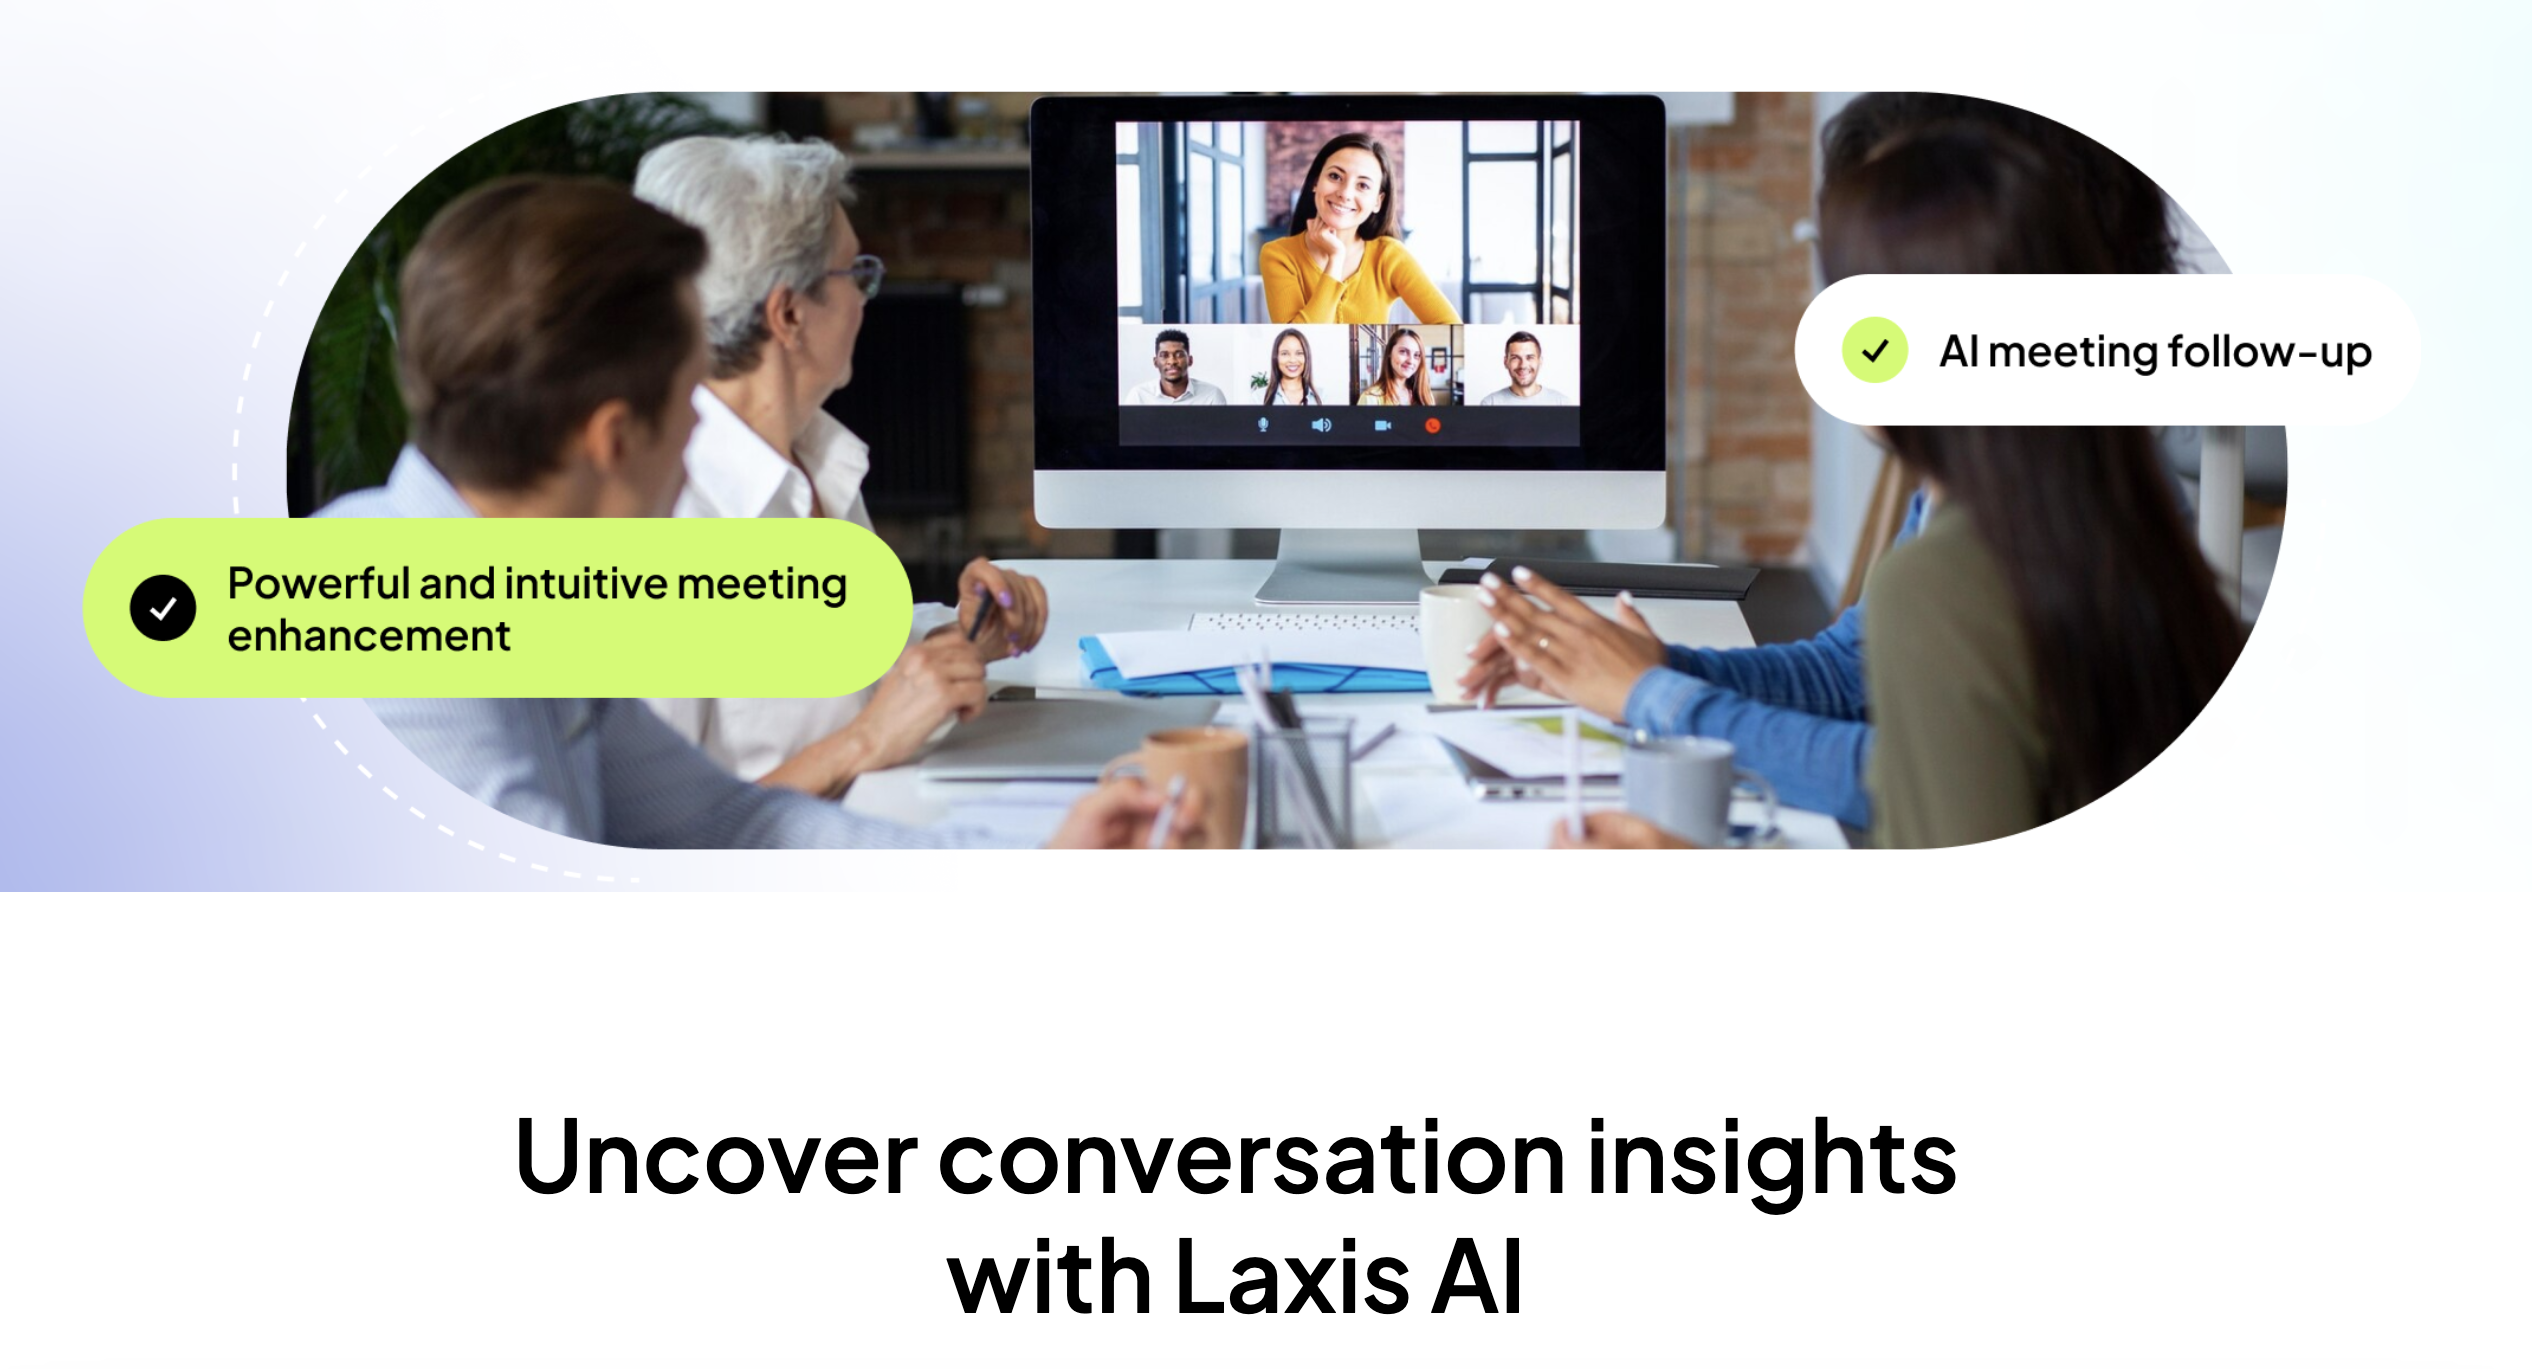 Laxis AI meeting assistant.